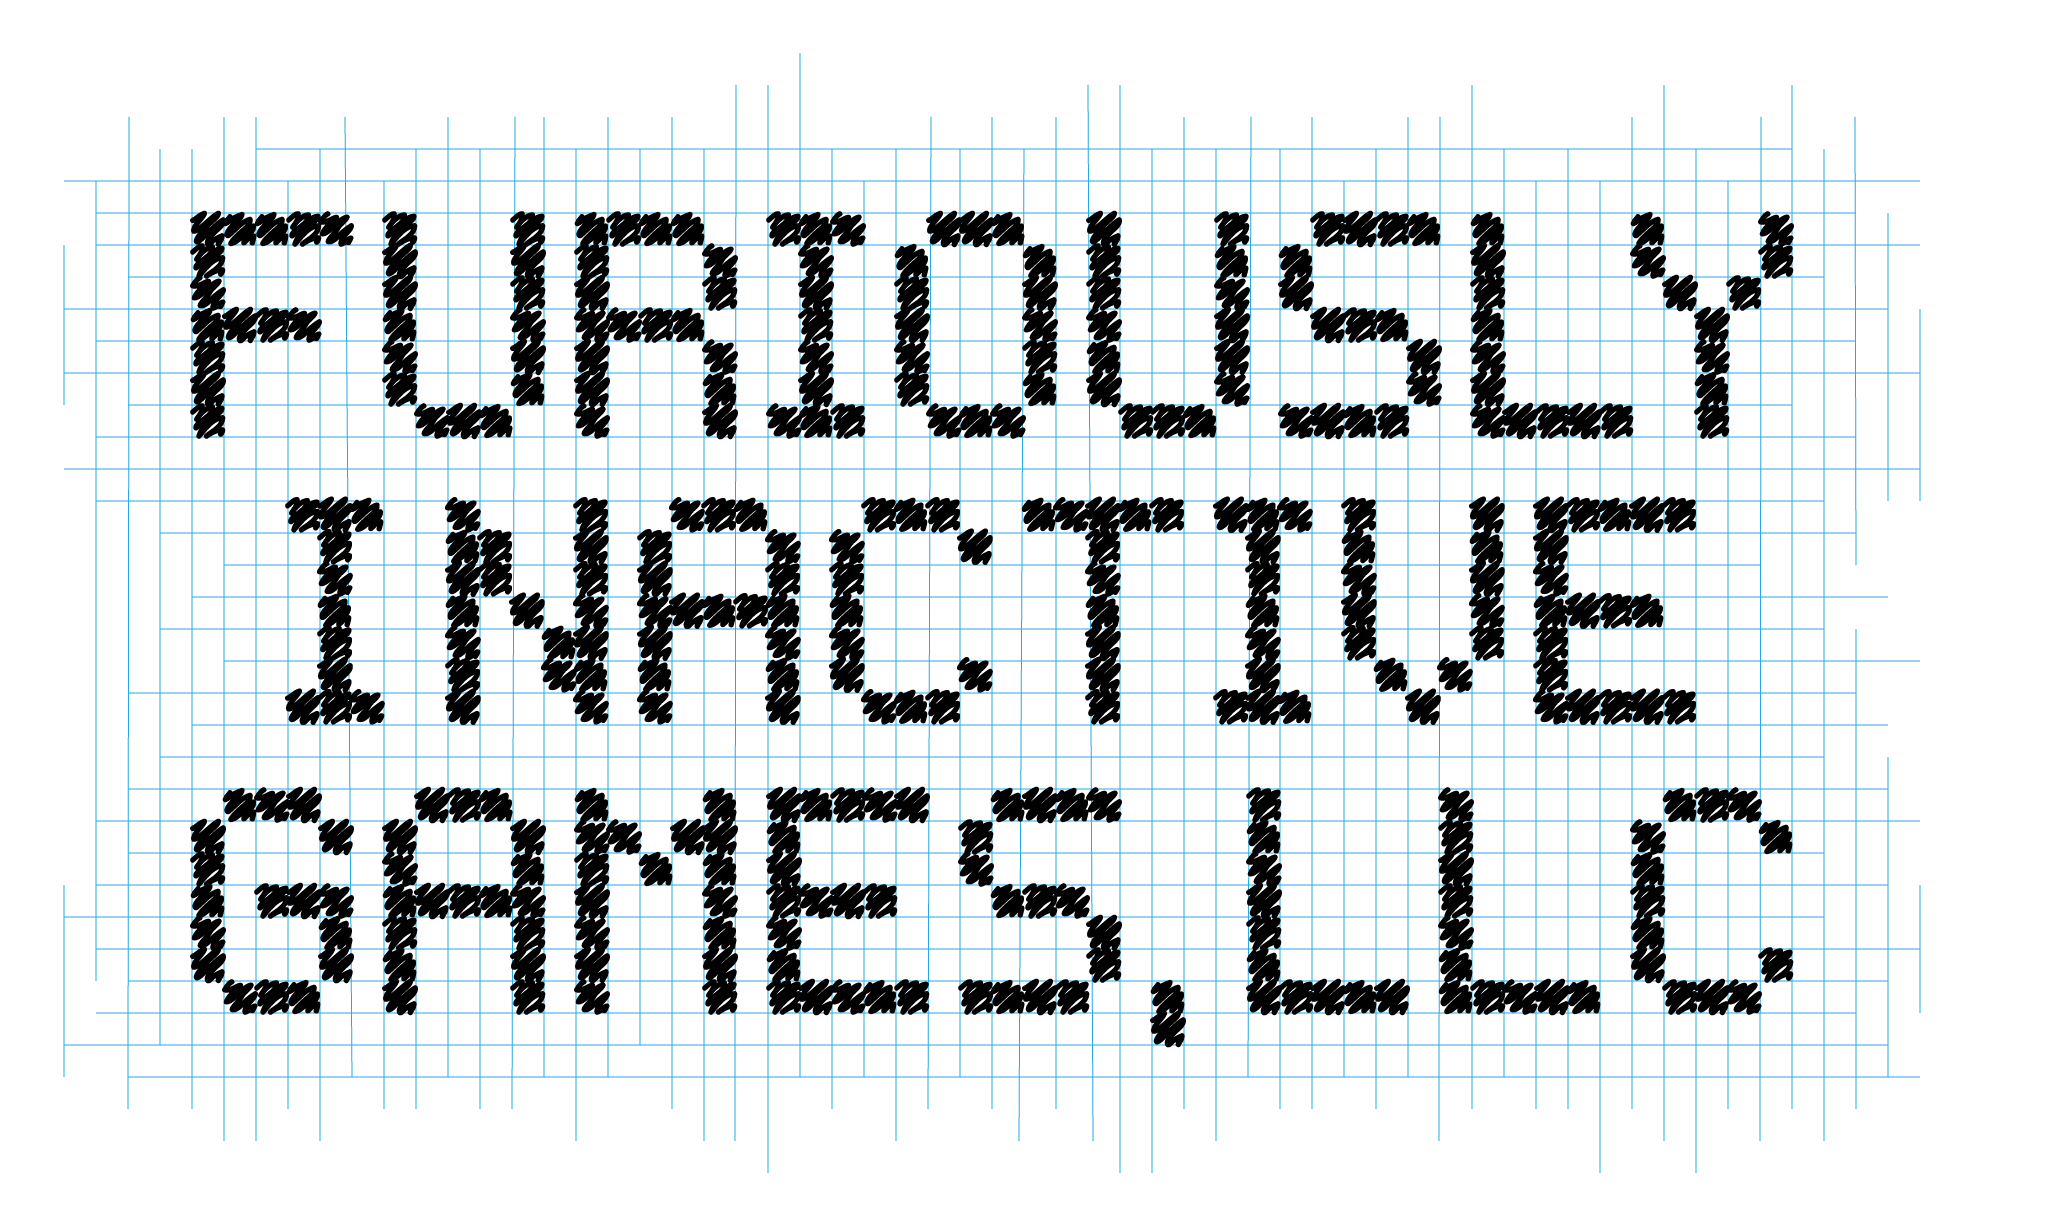 furiously_inactive_games_2048.png